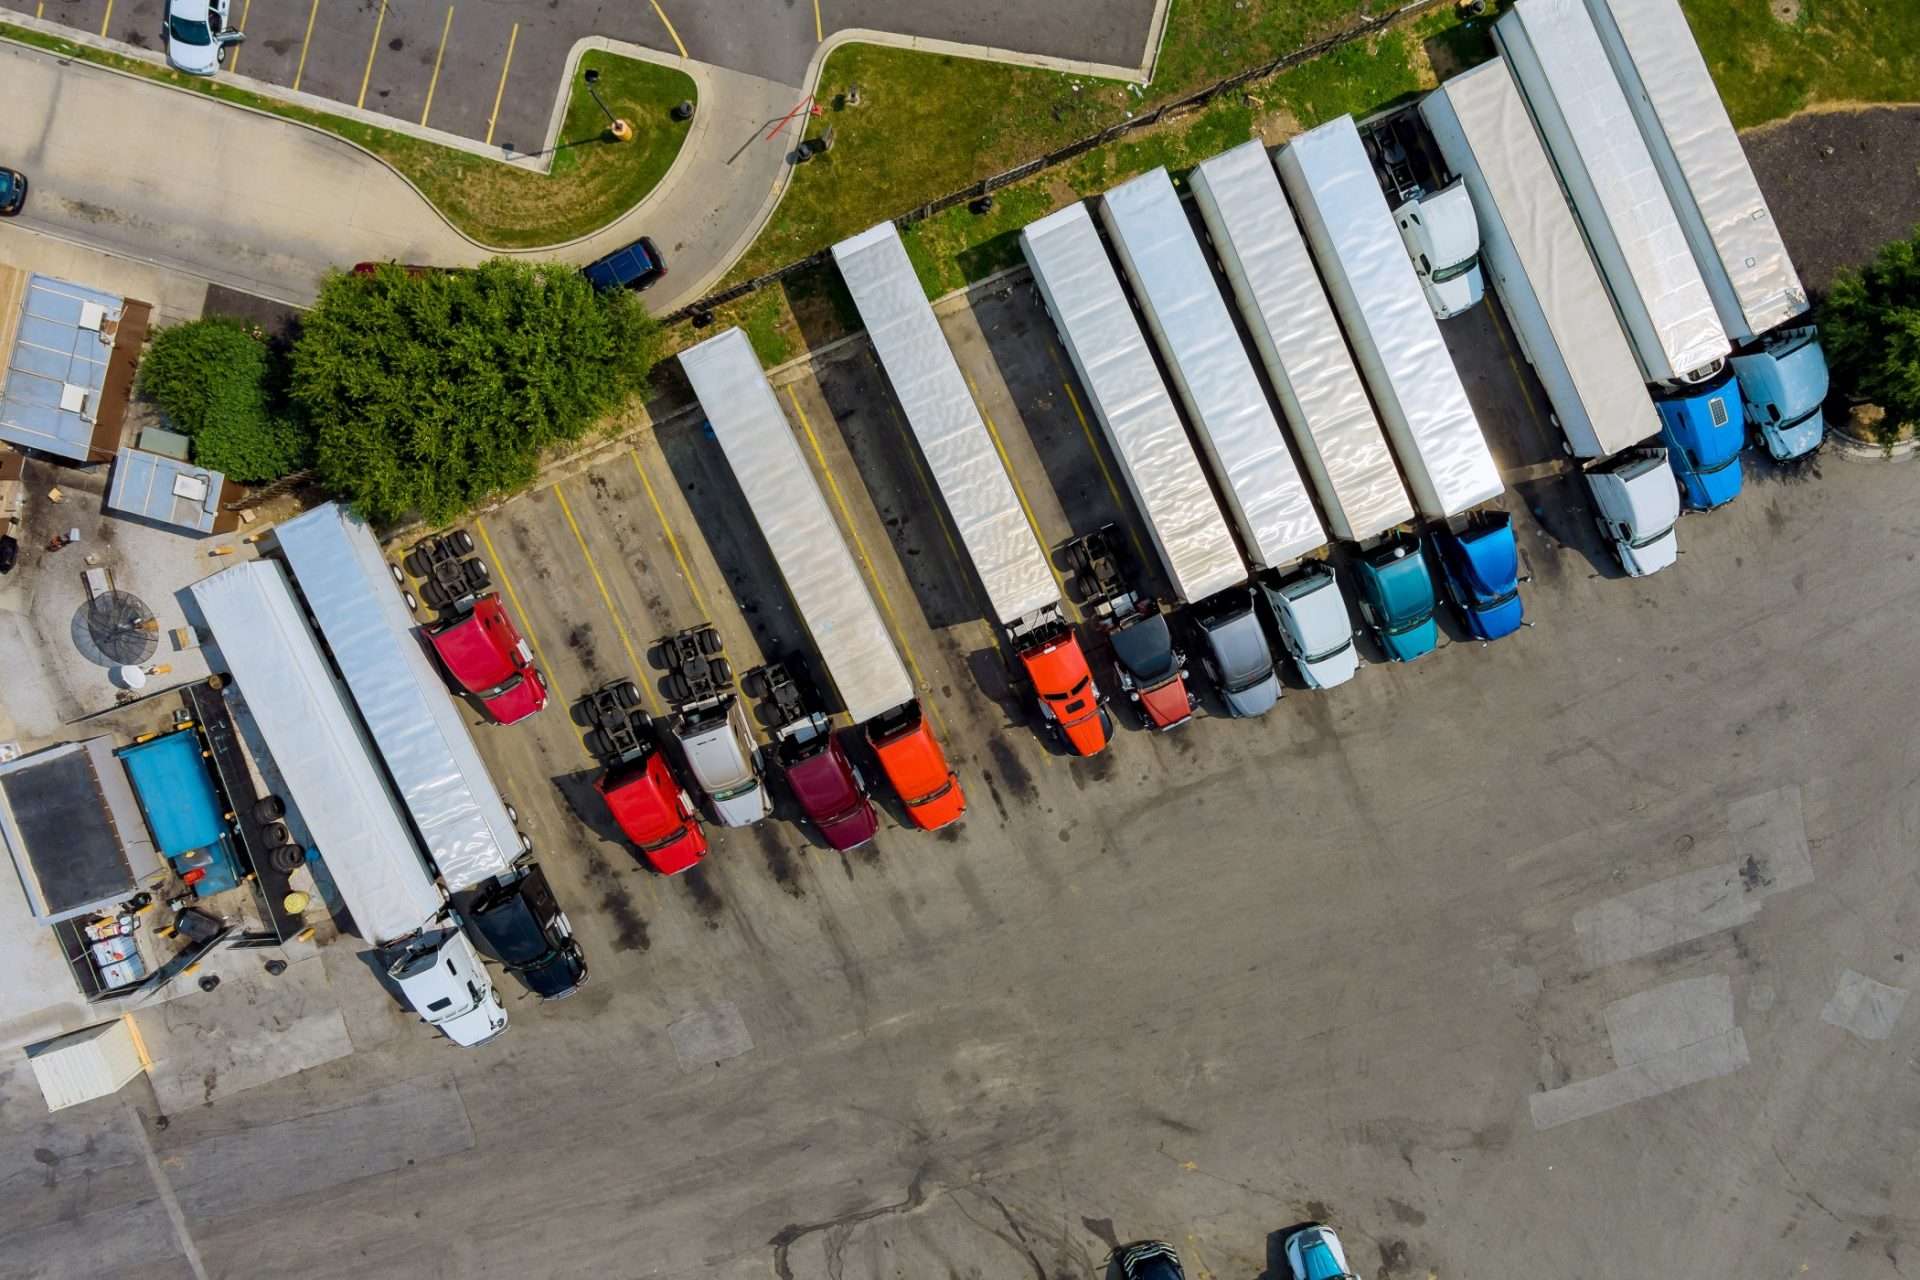 Aerial image of trucks parked in parking lot.